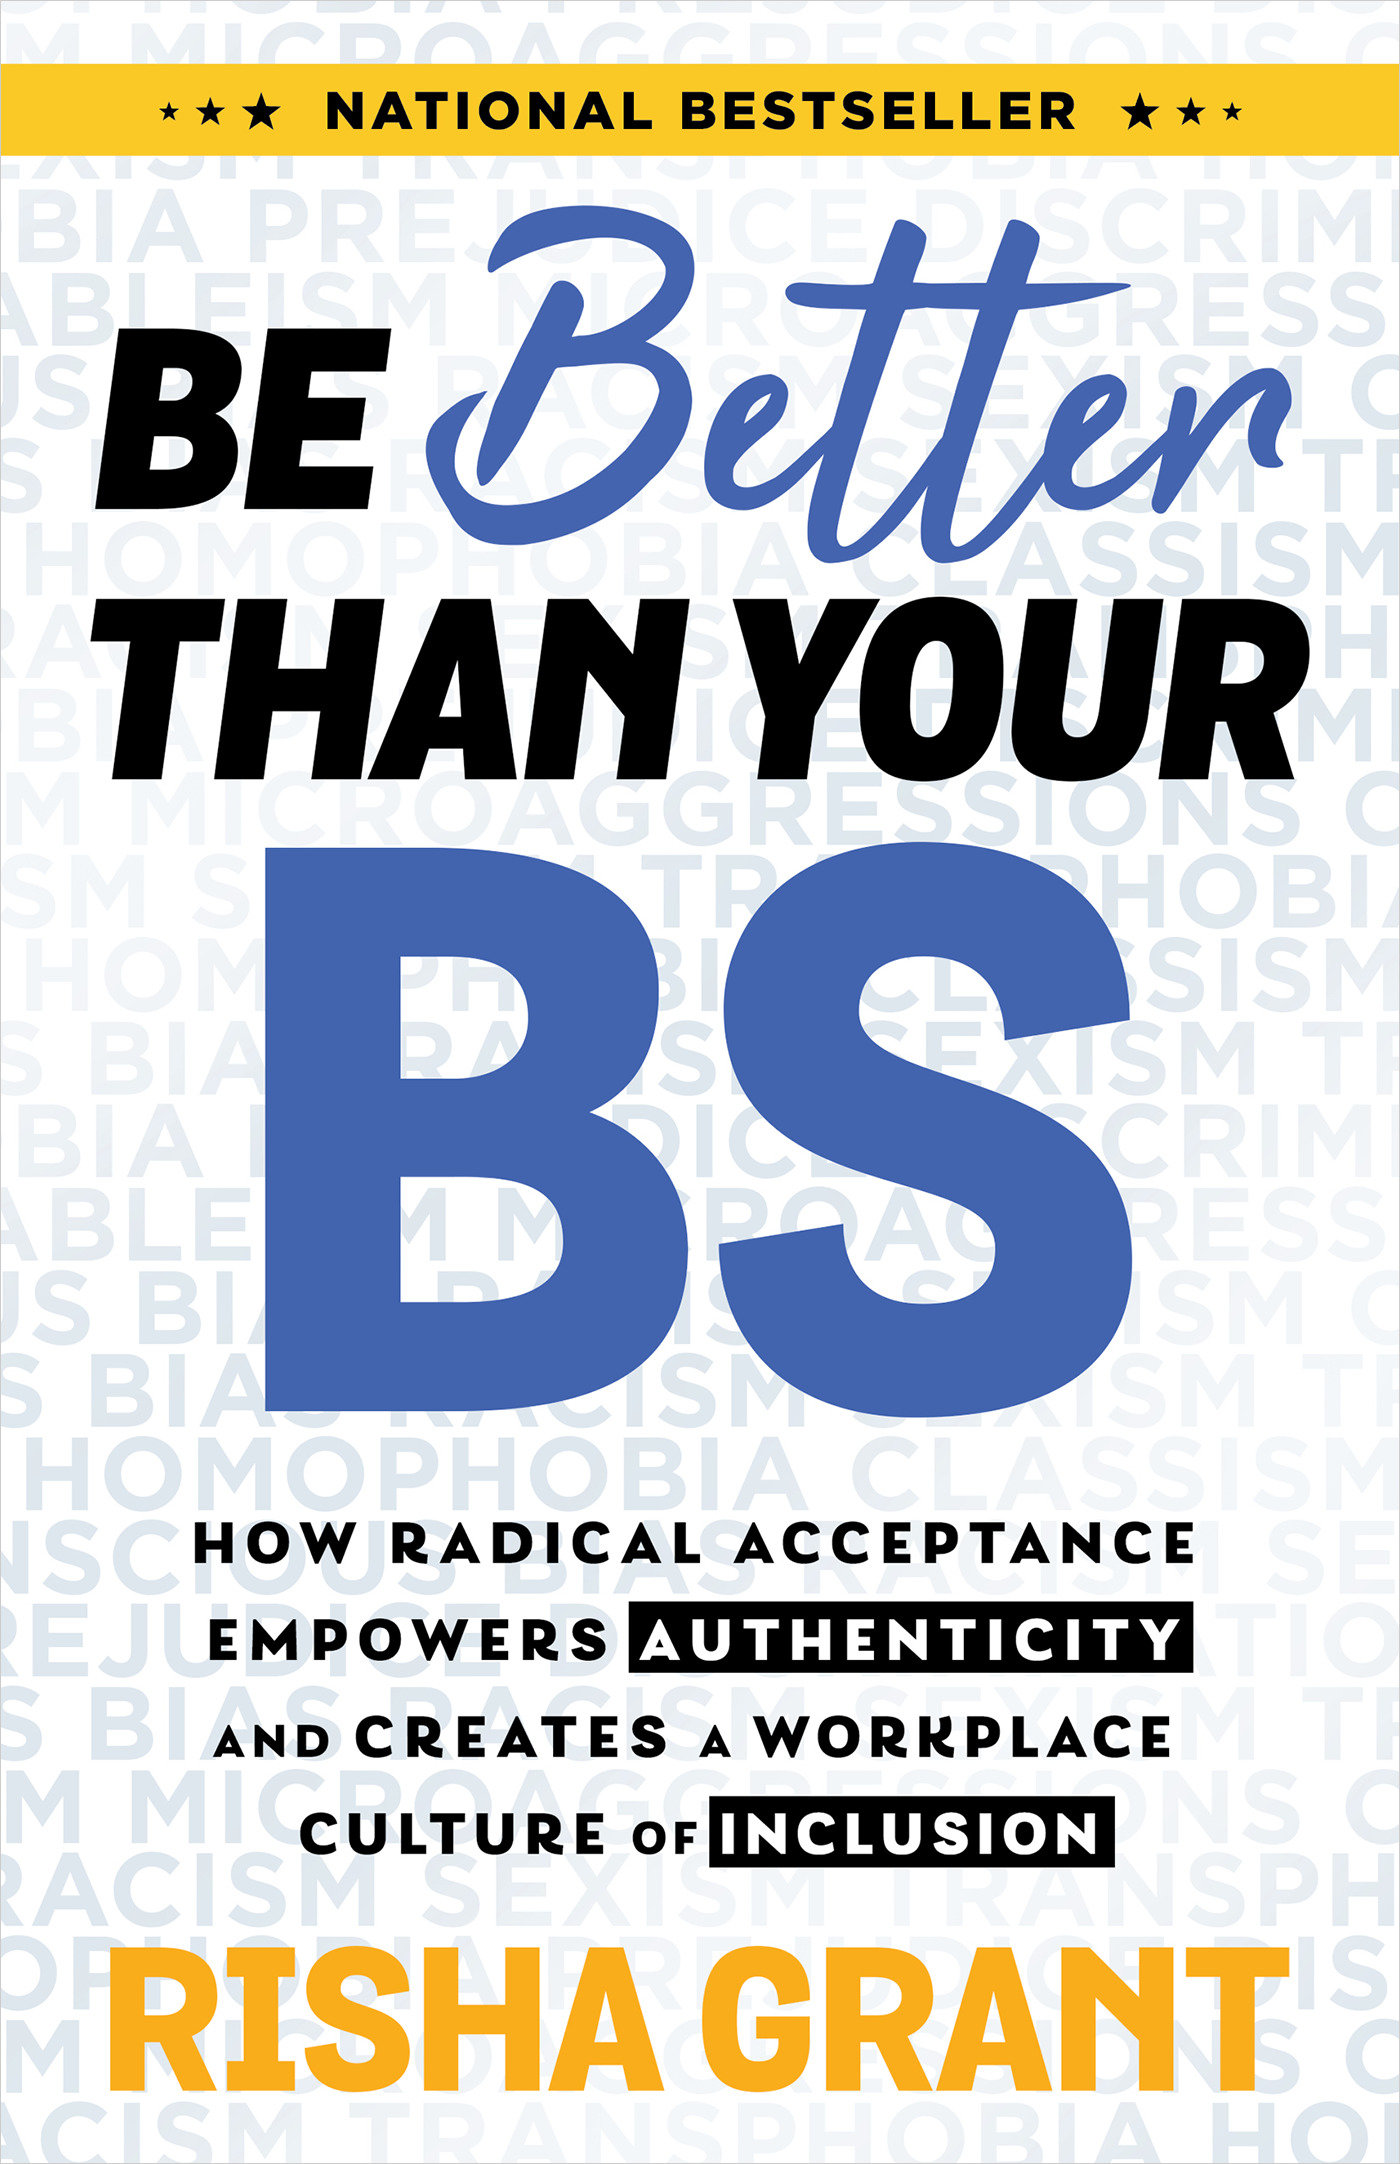 Be Better Than Your Bs (Hardcover Book)